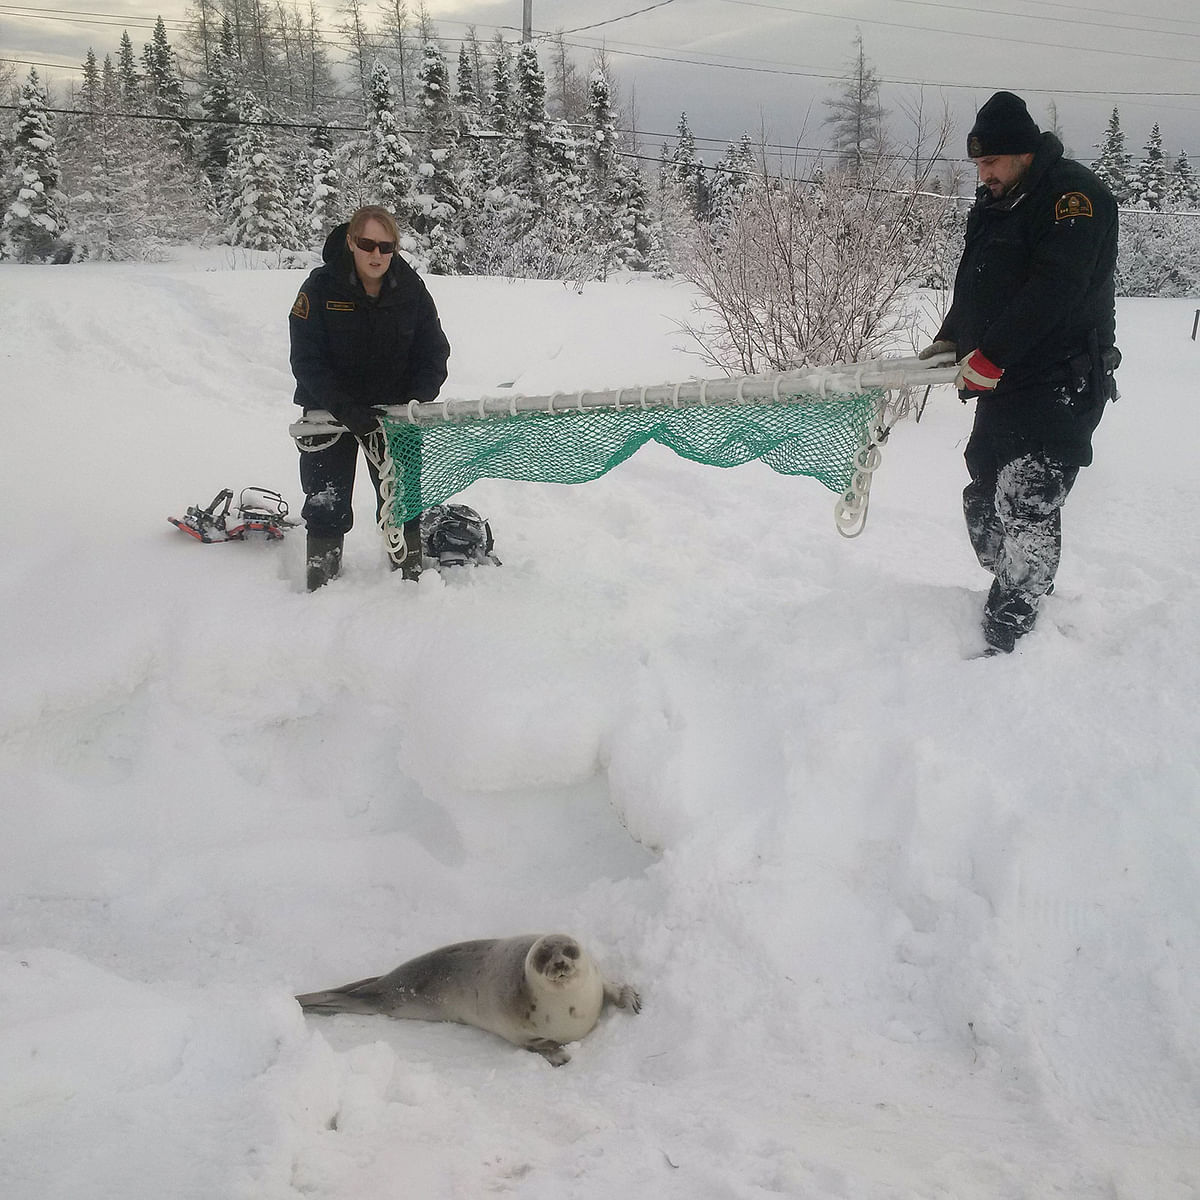 Fishery Officers from Fisheries and Oceans Canada (DFO) relocate a stranded seal near local residences, to open water in Roddickton-Bide Arm, Newfoundland, Canada, in photo received 11 January 2019. Photo: Reuters